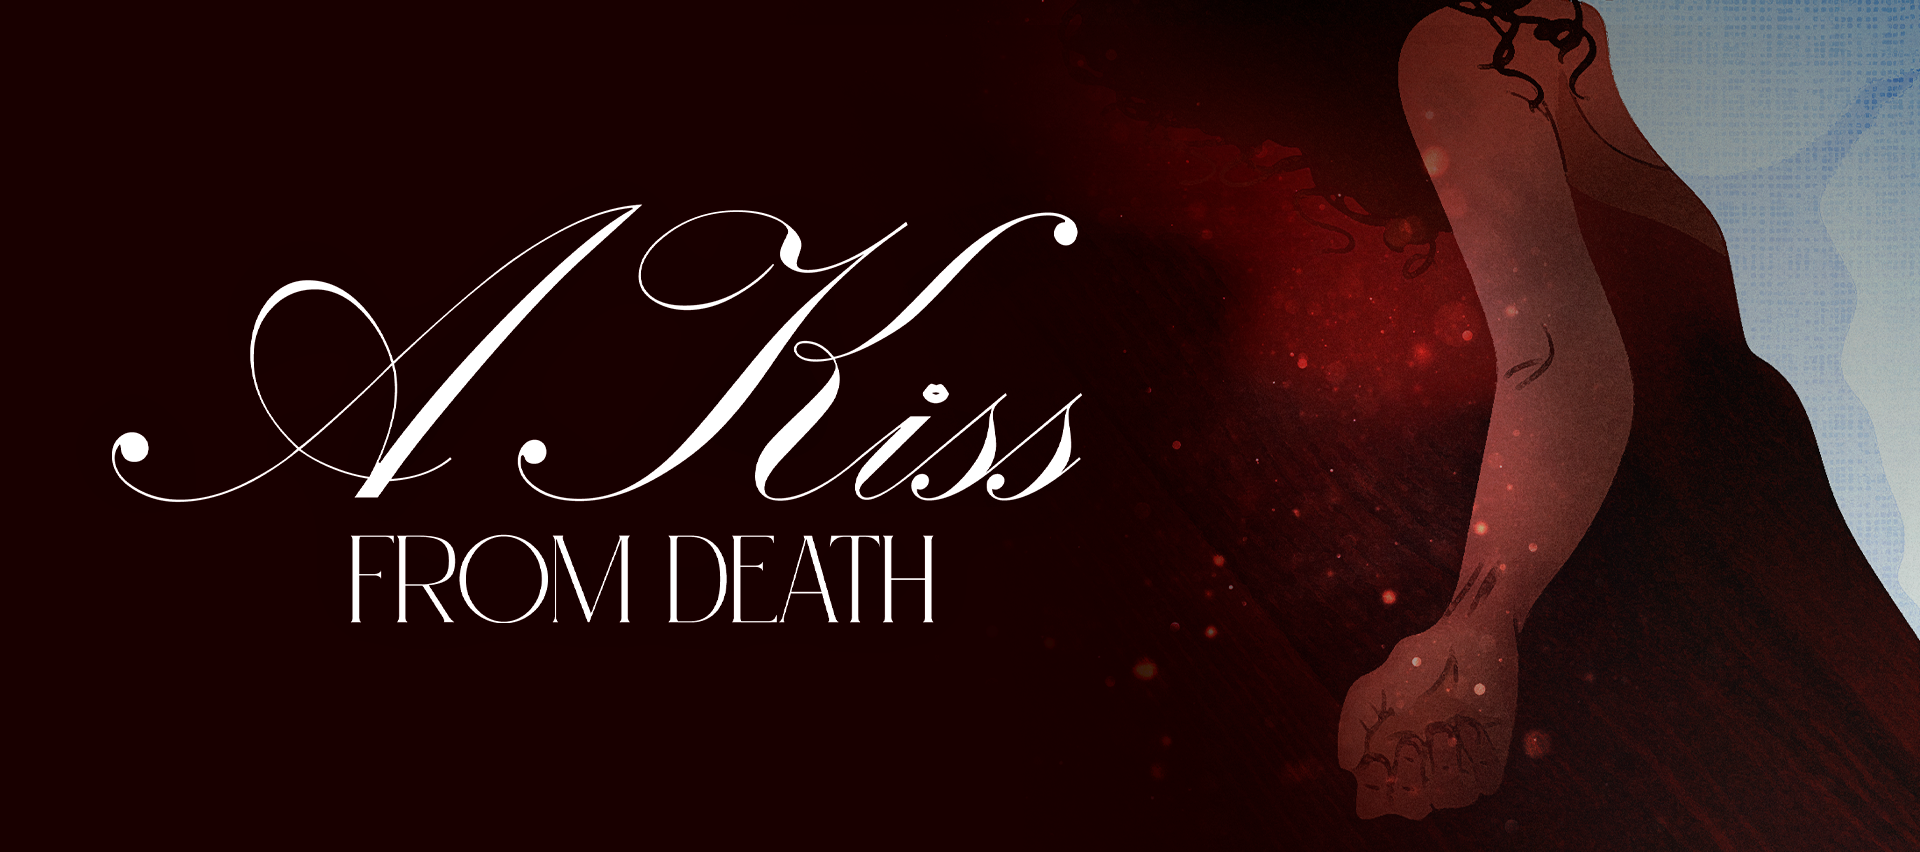 A Kiss from Death